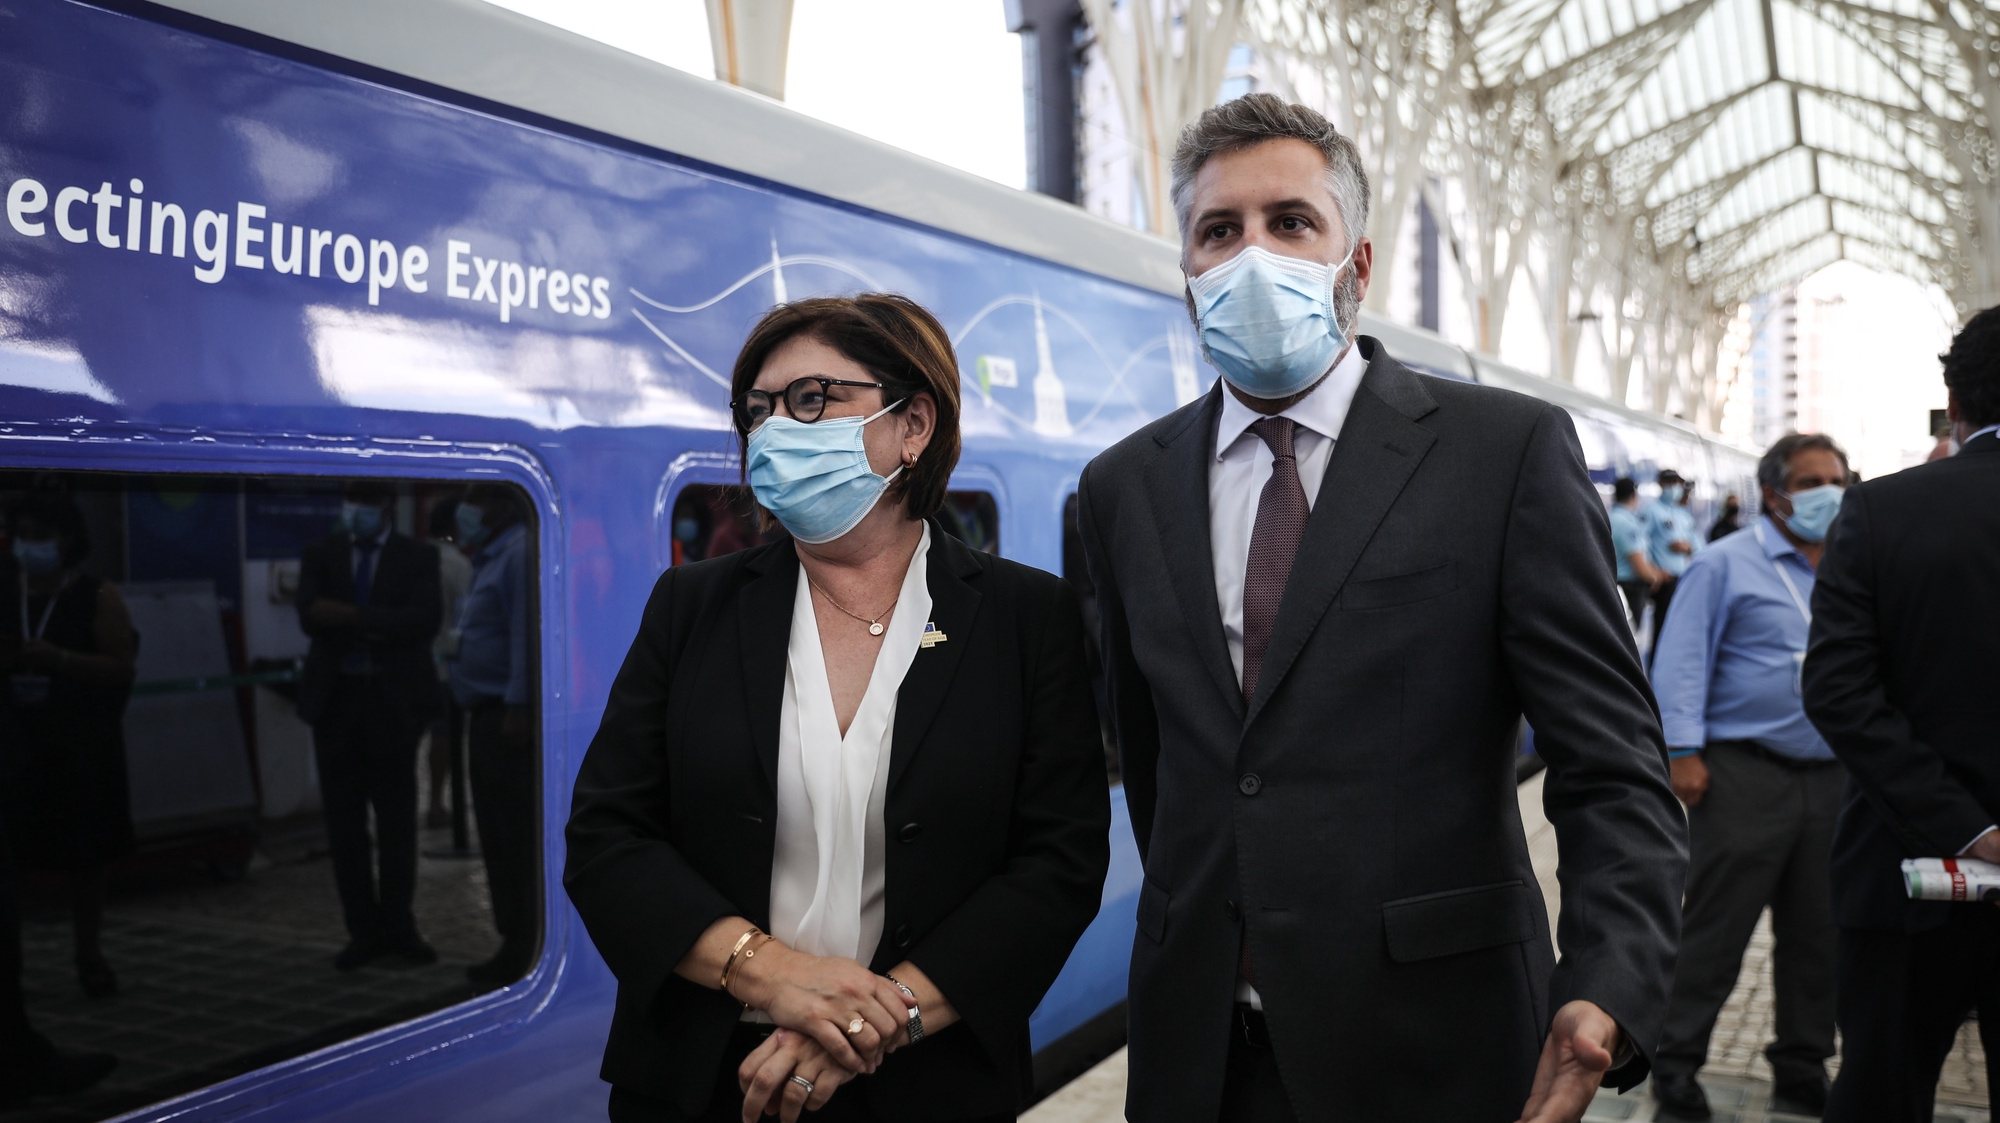 epa09443294 European Commissioner for Transports Adina Valean (L) and Portuguese Minister of Infrastructure and Housing Pedro Nuno Santos (R) moments before the train departure during the Connecting Europe Express ceremony in Gare do Oriente train station in Lisbon, Portugal, 02 September 2021.  EPA/RODRIGO ANTUNES